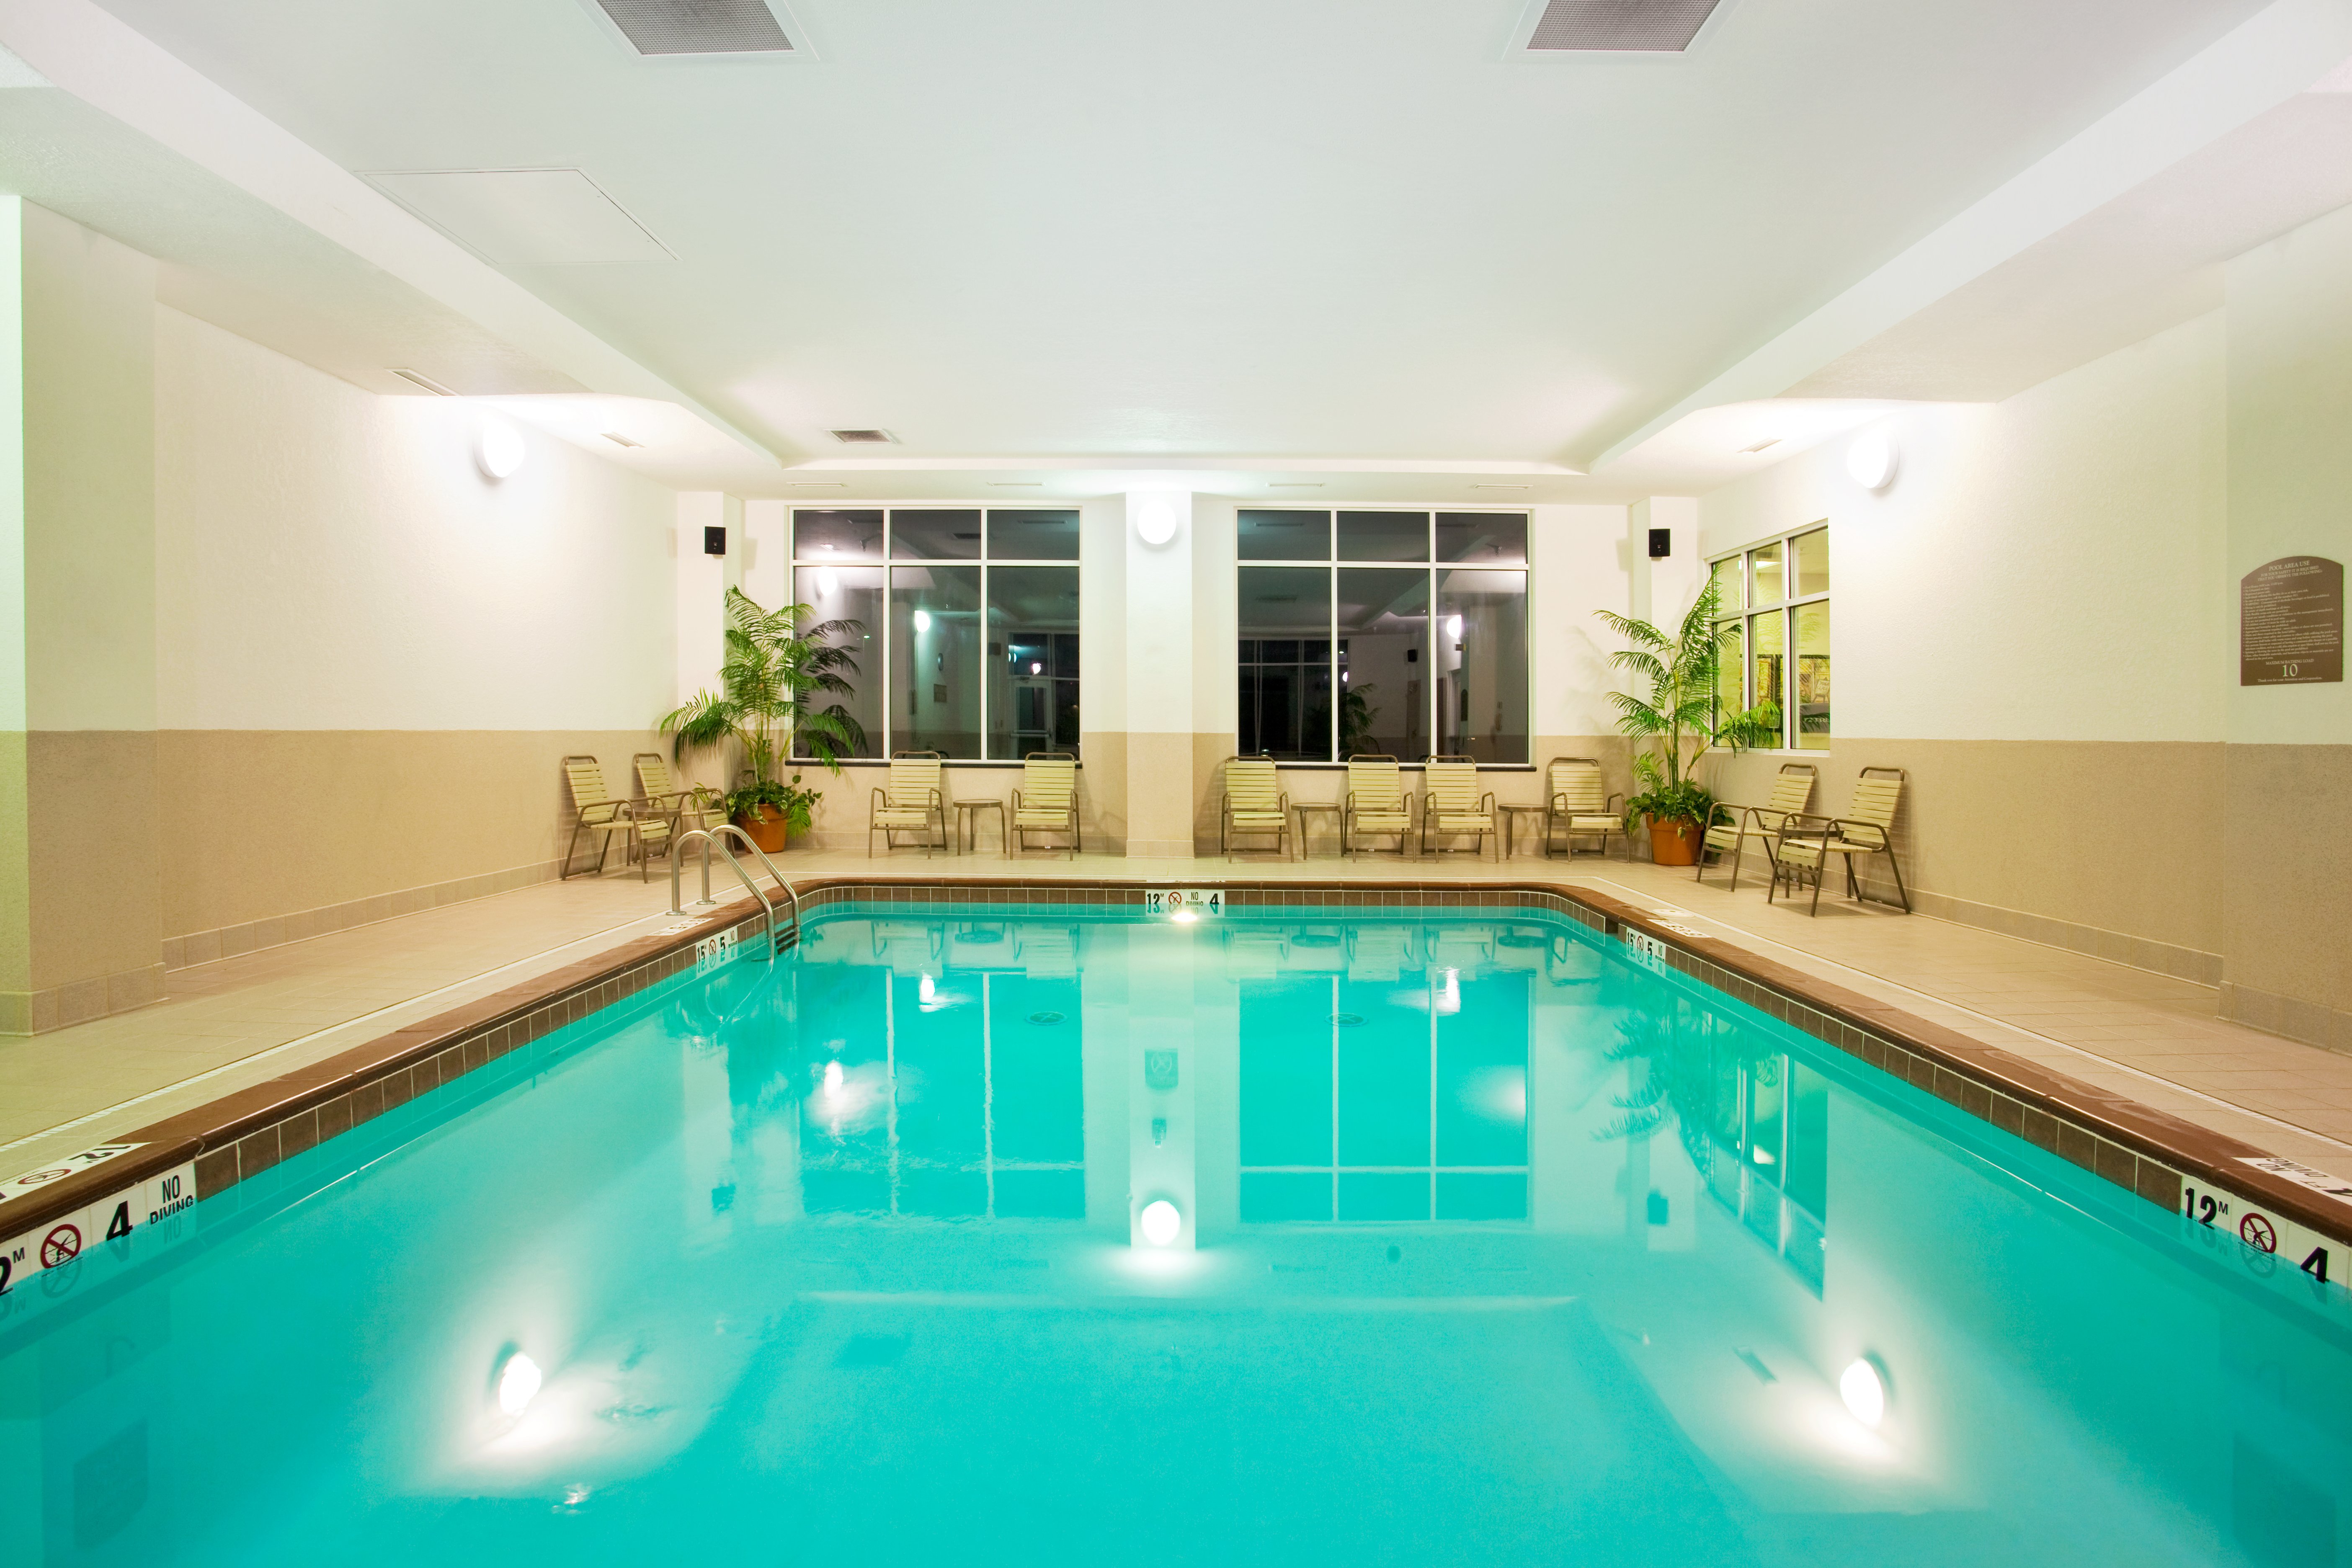 Our swimming pool is a perfect retreat for health and wellness.